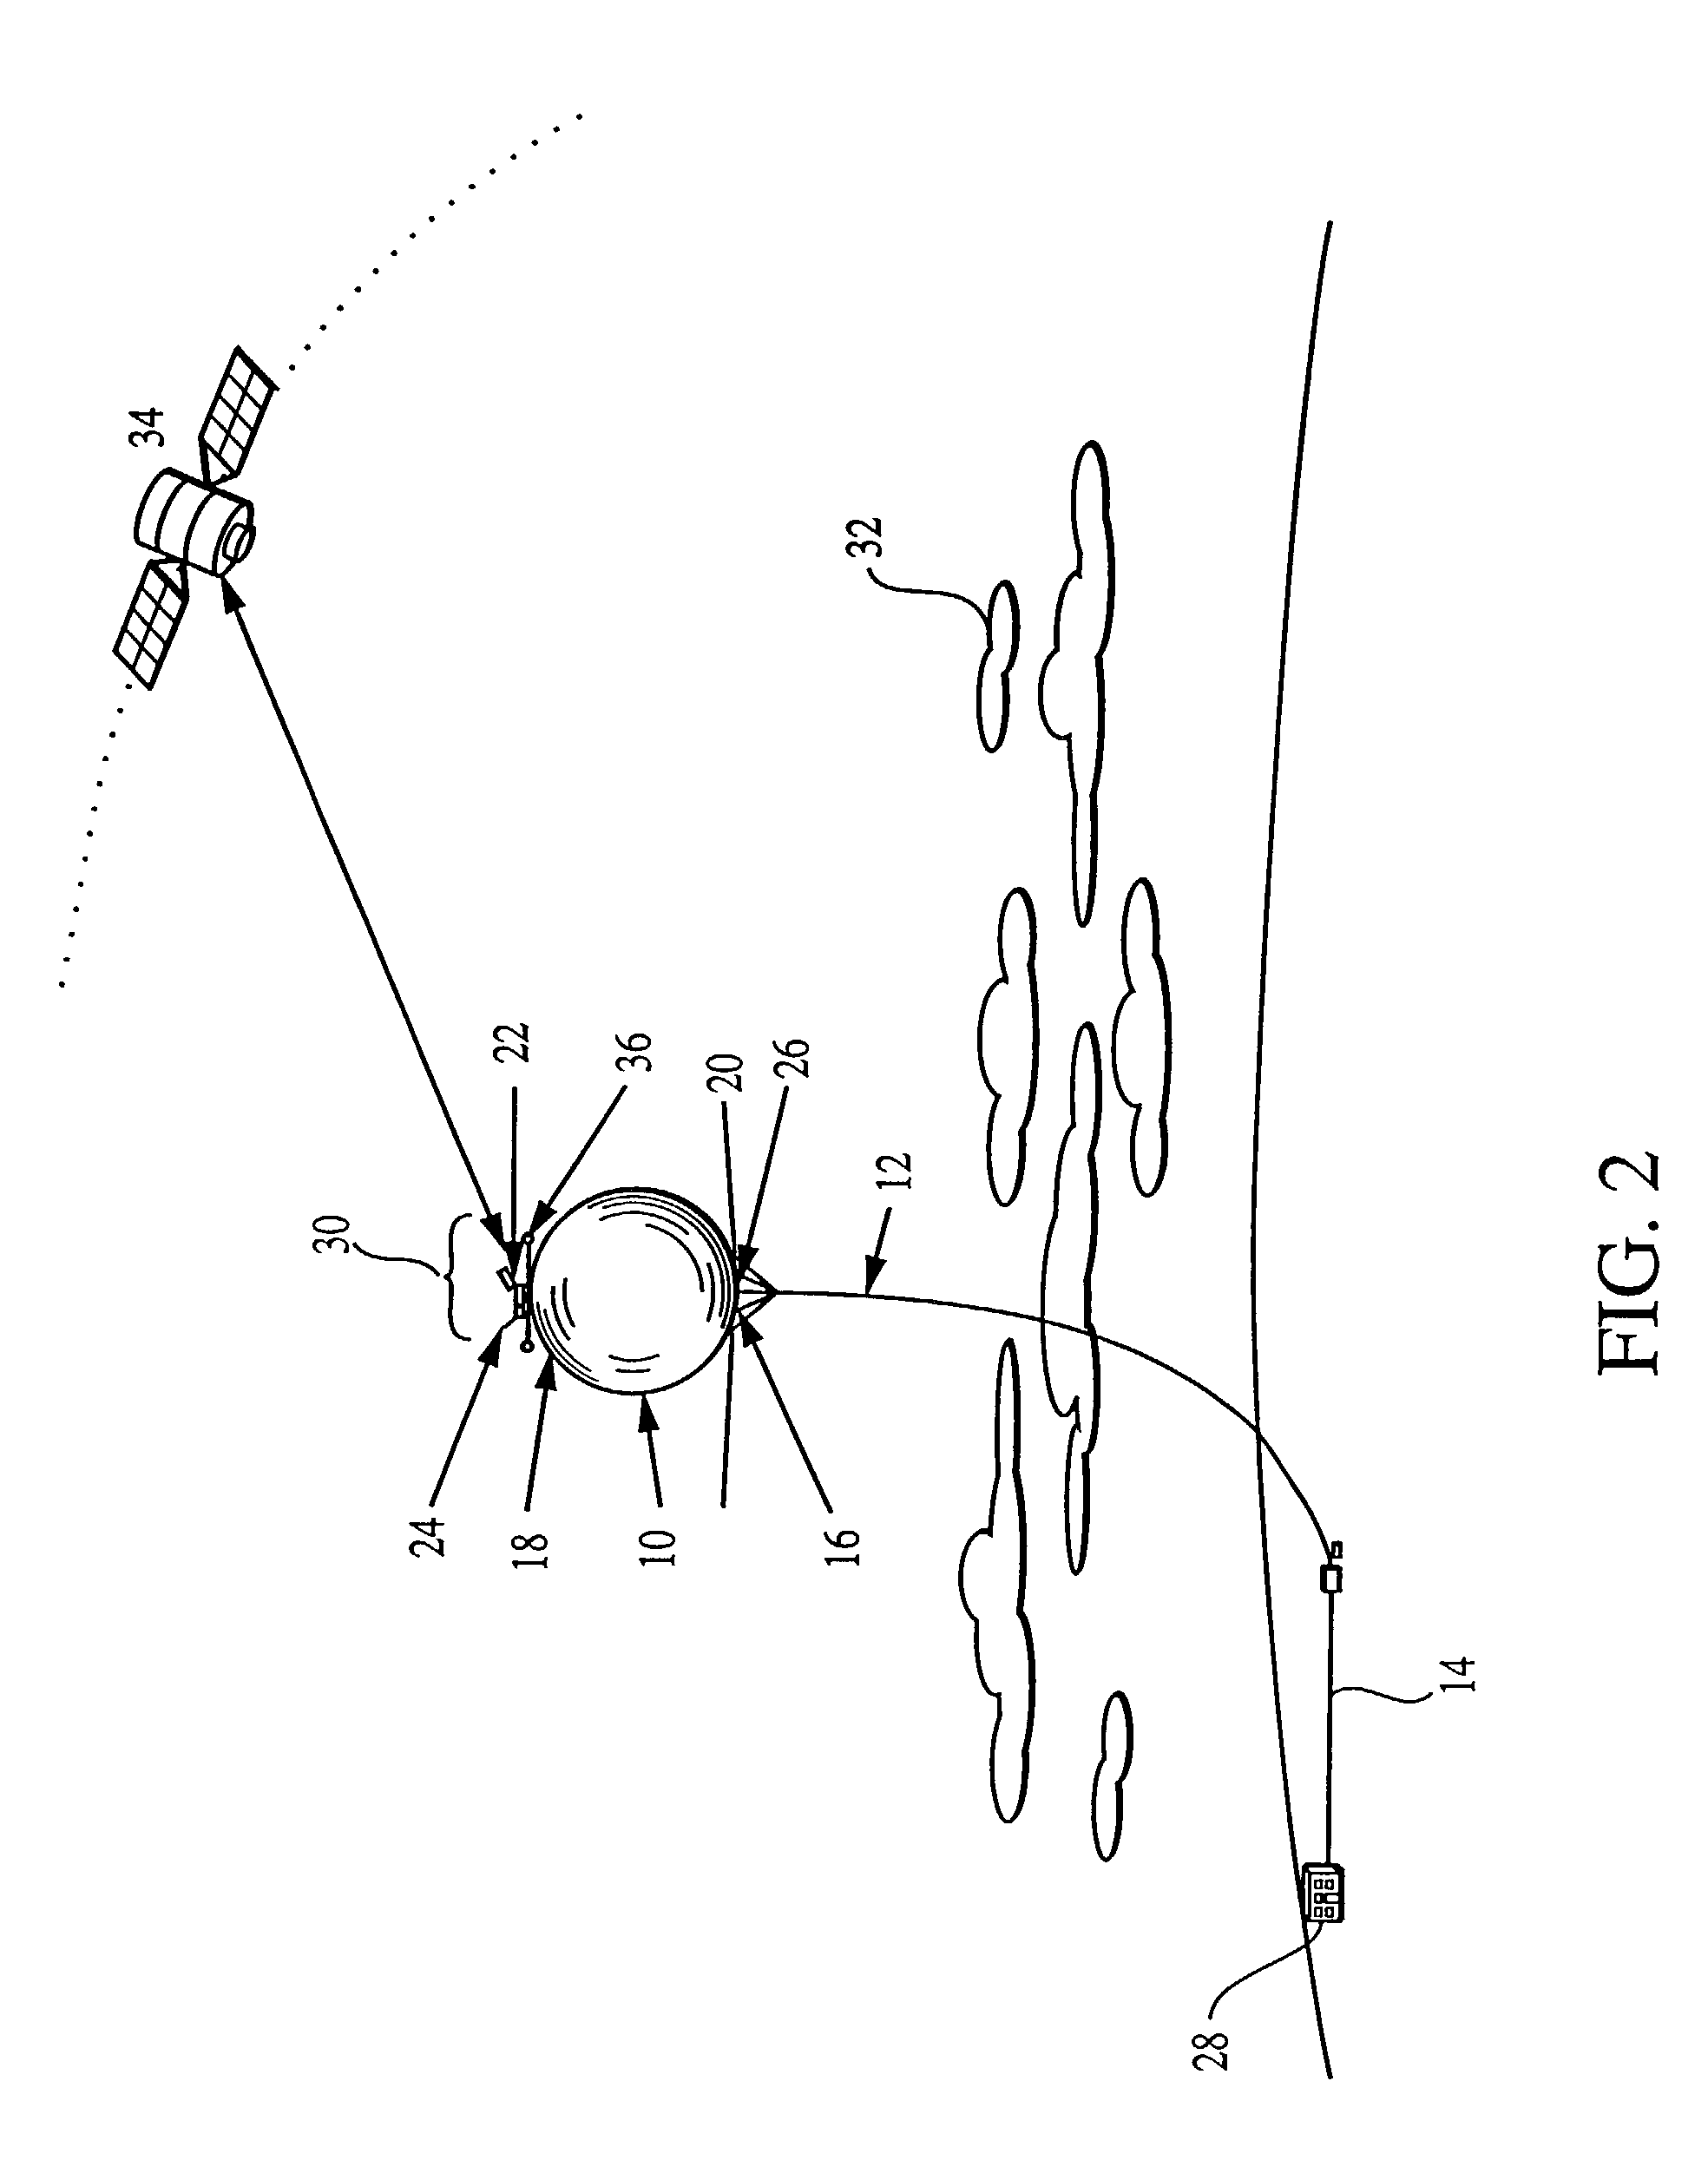 Optical communication system using a high altitude tethered balloon